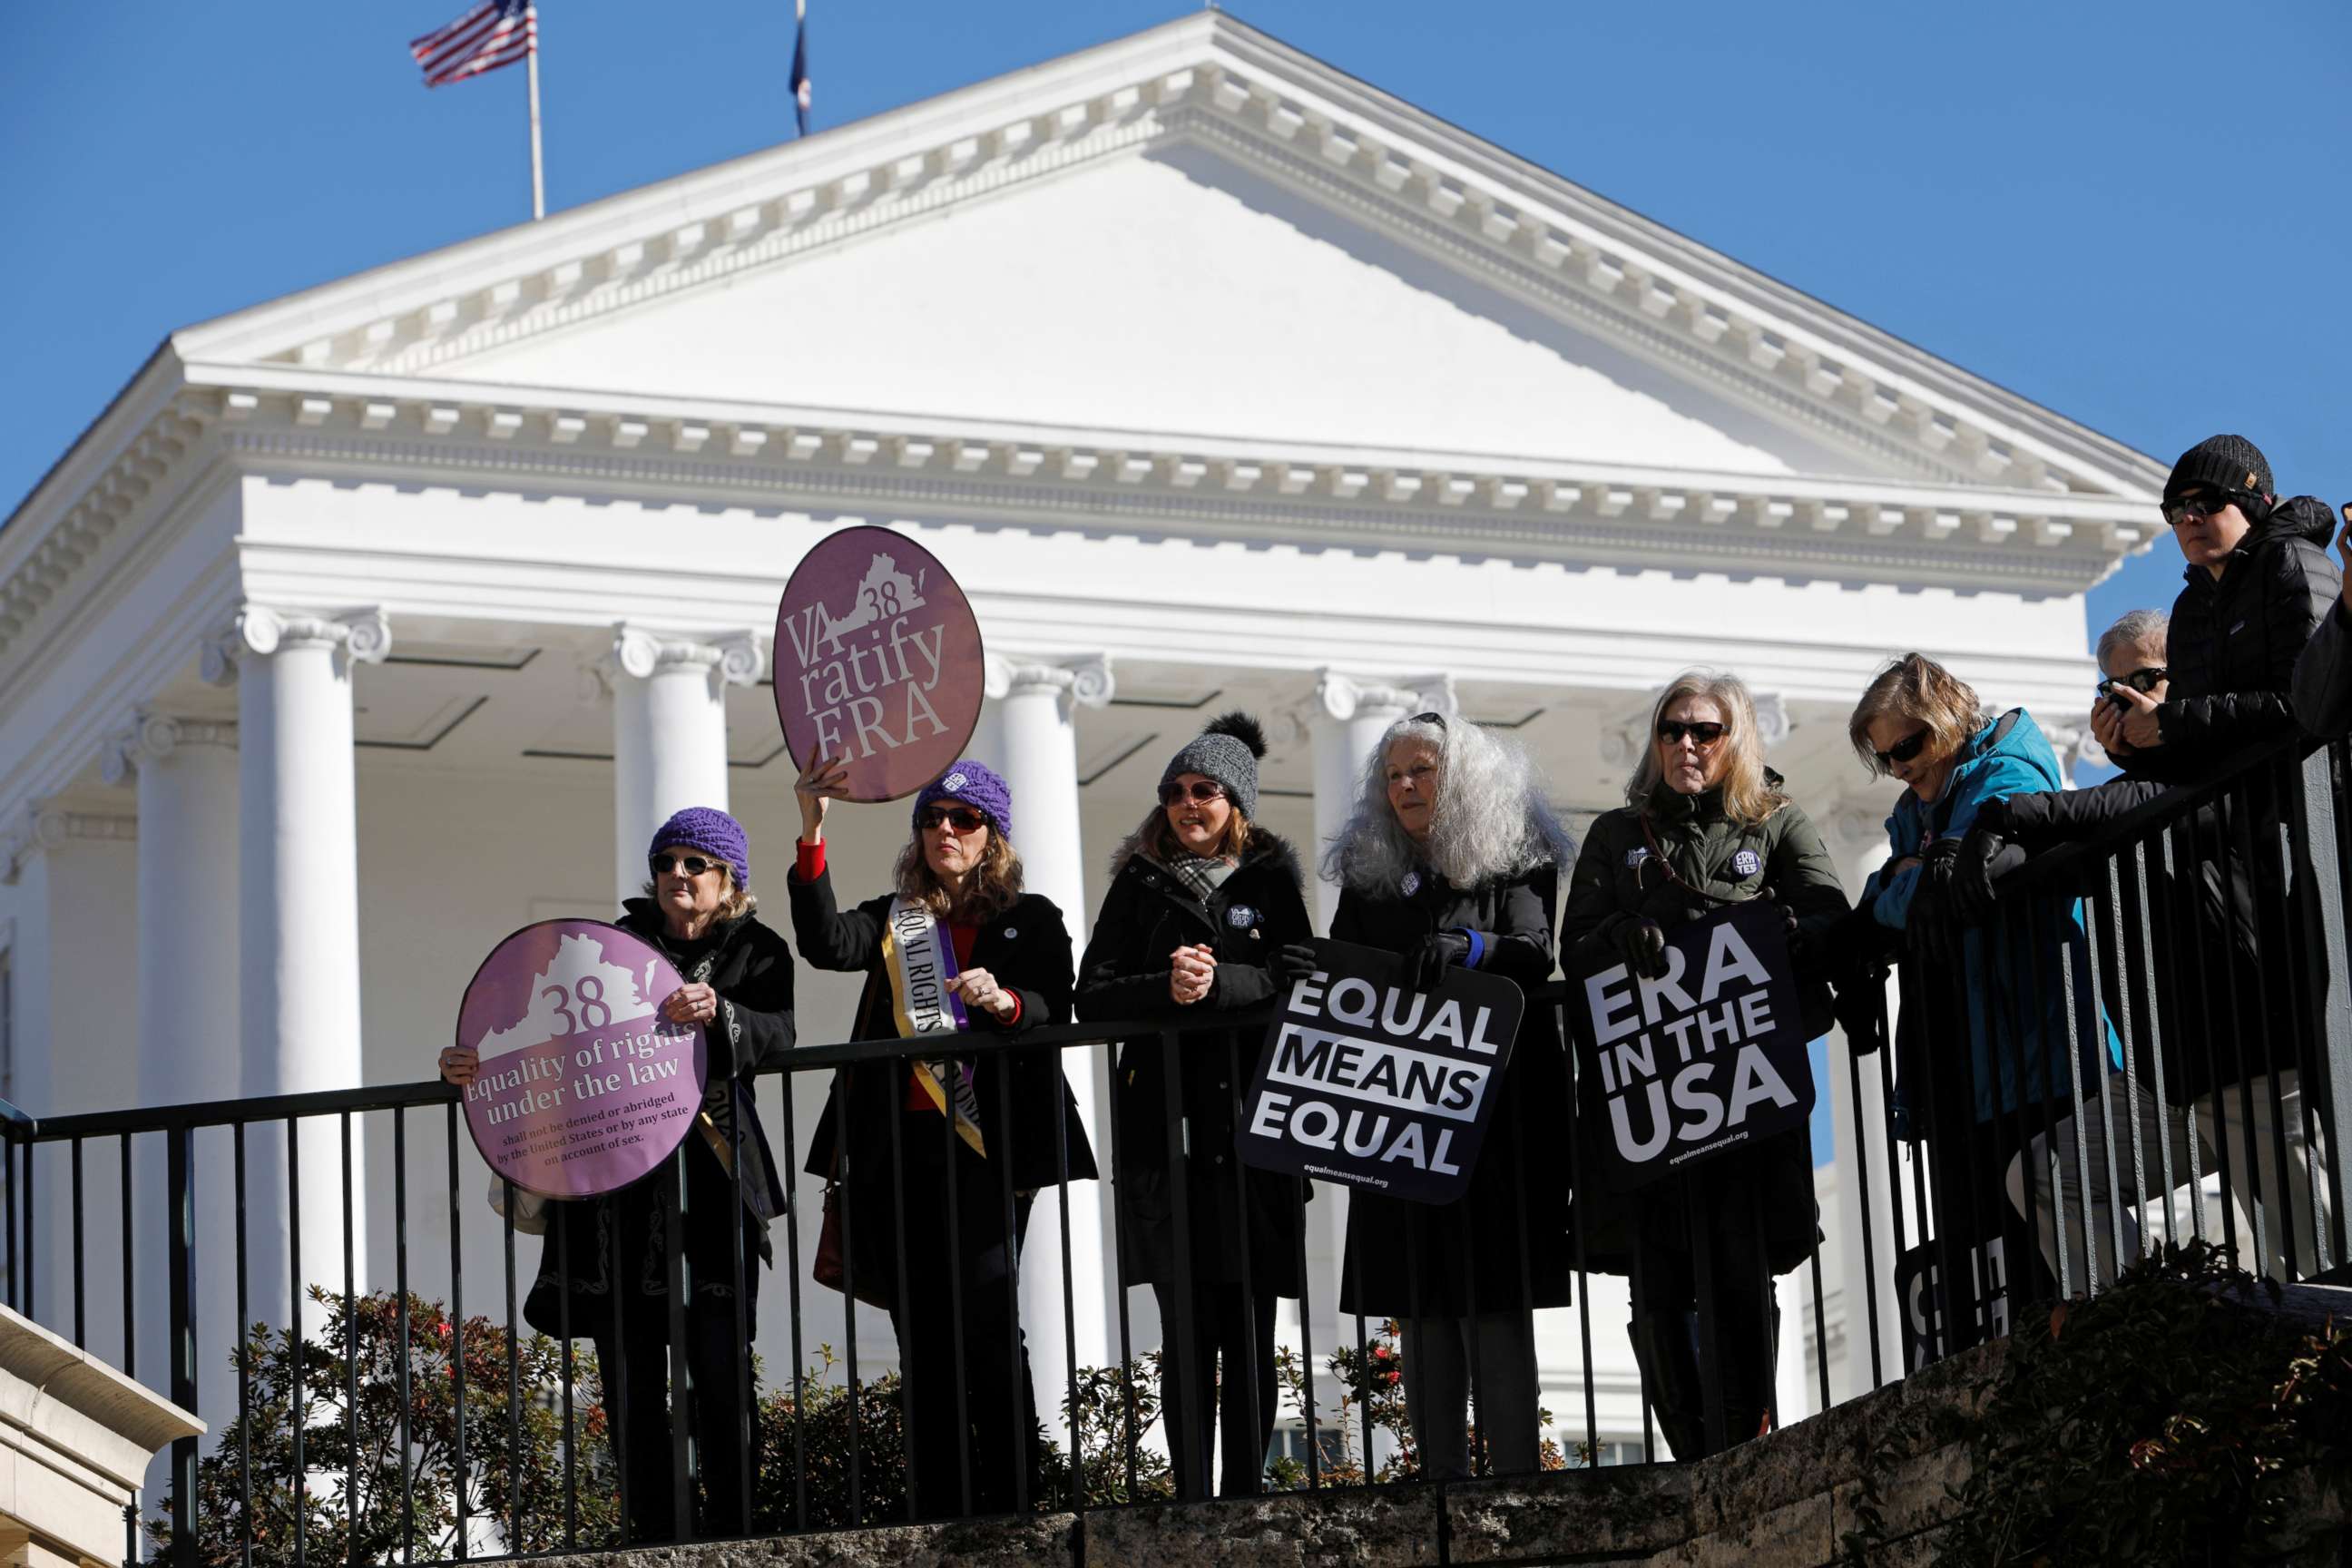 PHOTO: Activists call for Virginia's adoption of the Equal Rights Amendment gather outside the Virginia State Capitol building as the General Assembly prepares to convene in Richmond, Va., Jan. 8, 2020.